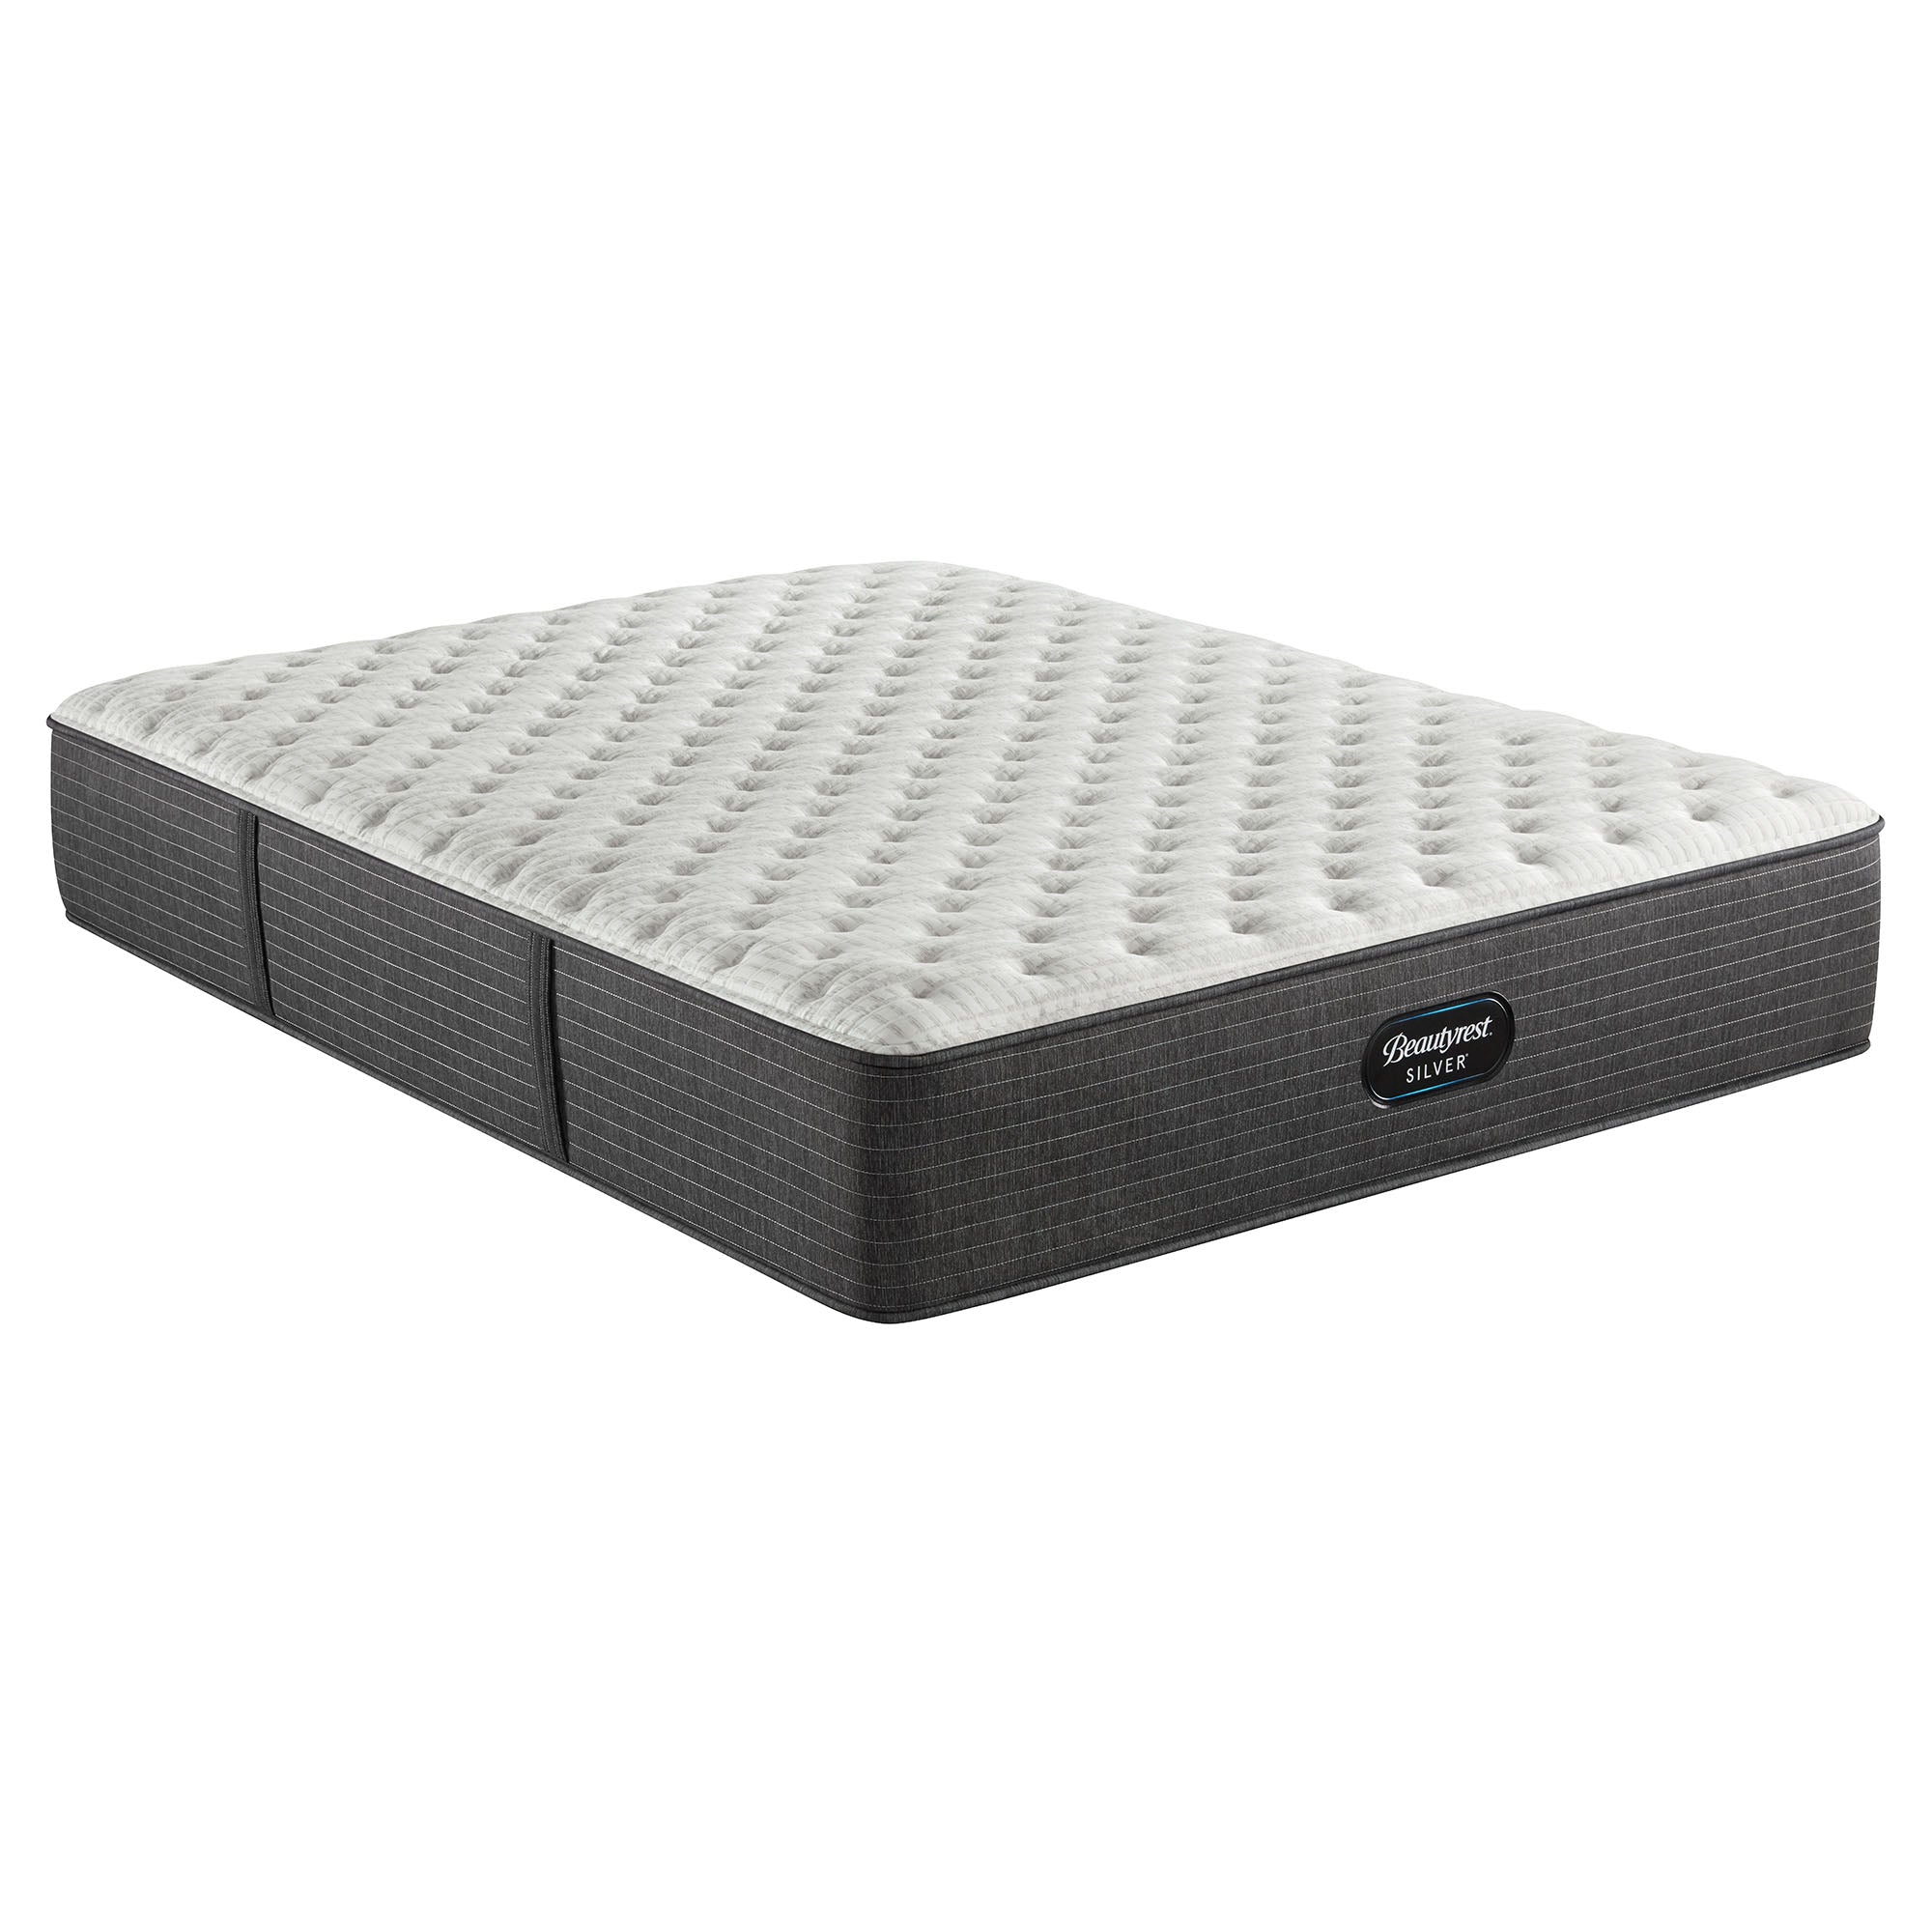 The Beautyrest Silver BRS900-C Extra Firm mattress alone on a white background